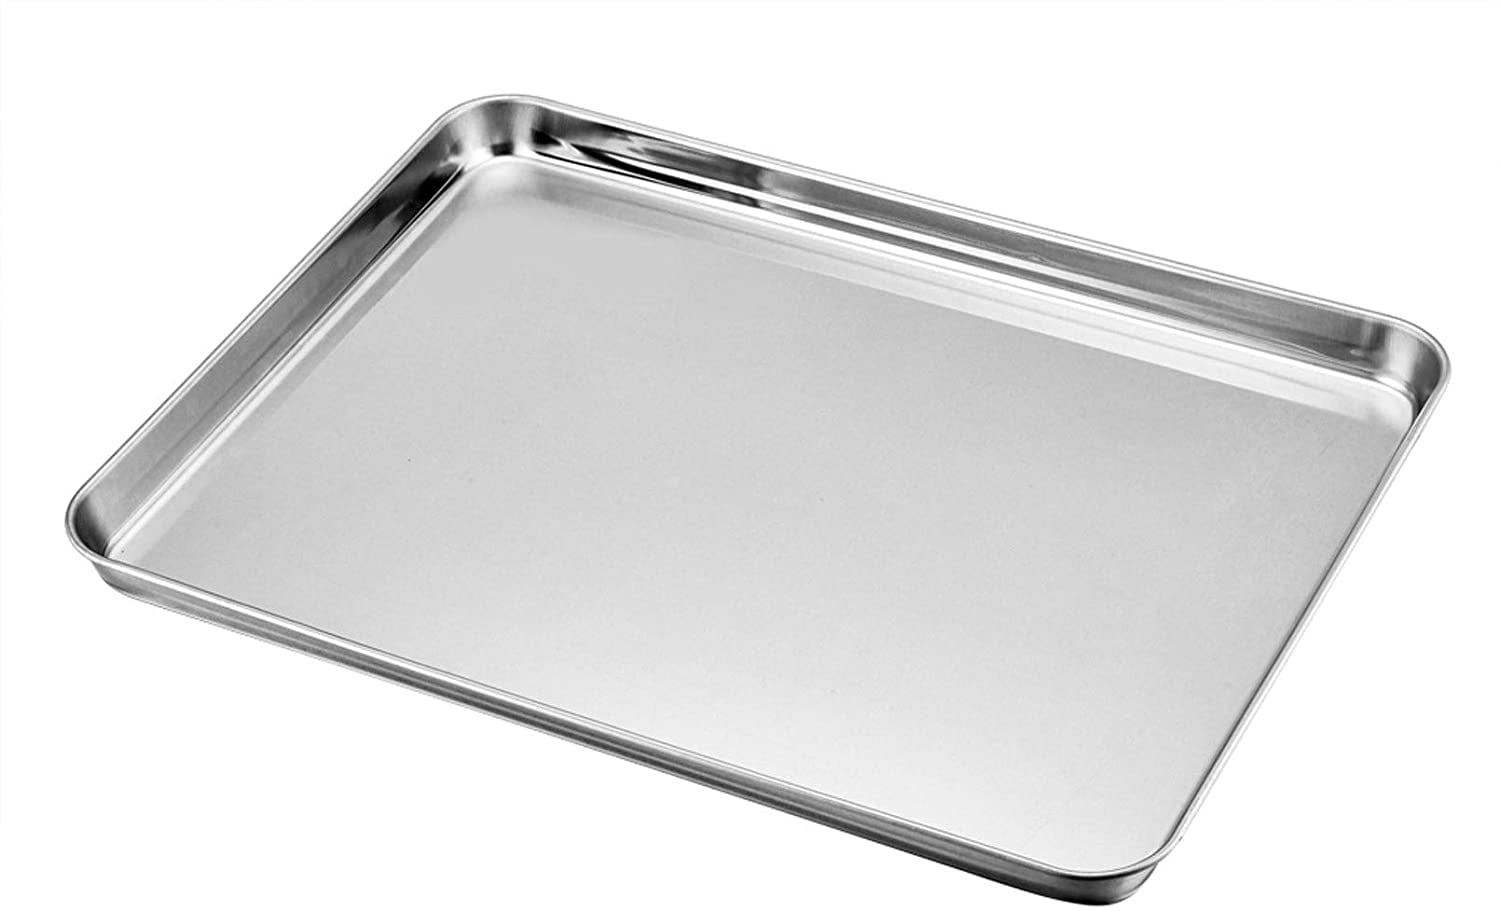 Small Baking Sheet Set of 2, 10.5”x8.3” Stainless Steel Cookies Sheet Pan  for